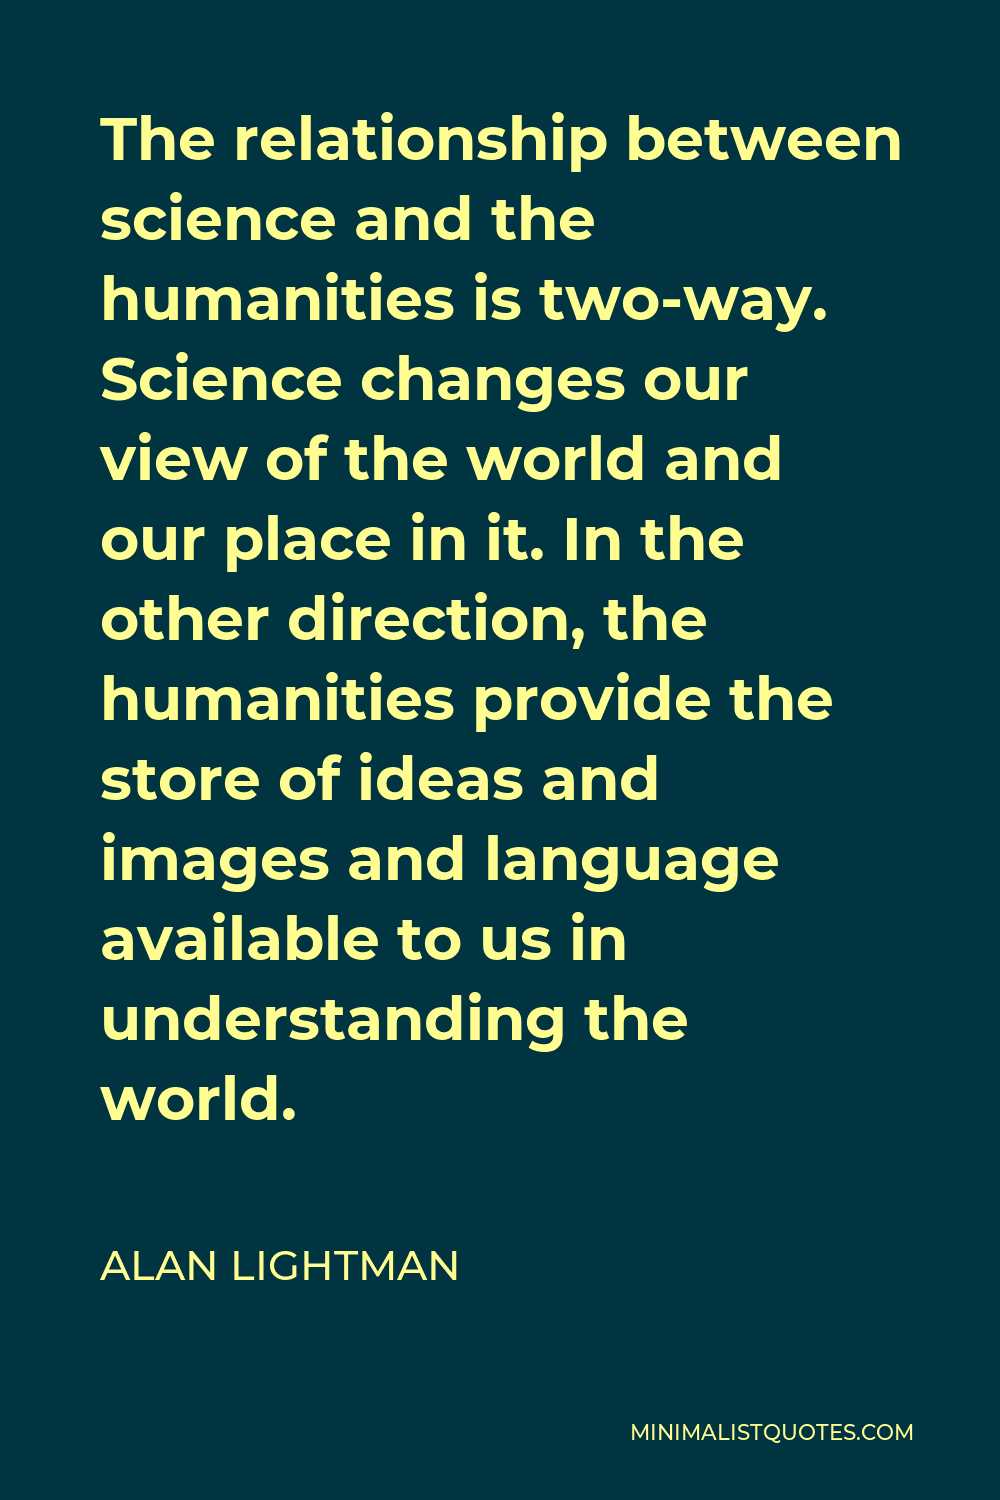 Alan Lightman Quote - The relationship between science and the humanities is two-way. Science changes our view of the world and our place in it. In the other direction, the humanities provide the store of ideas and images and language available to us in understanding the world.